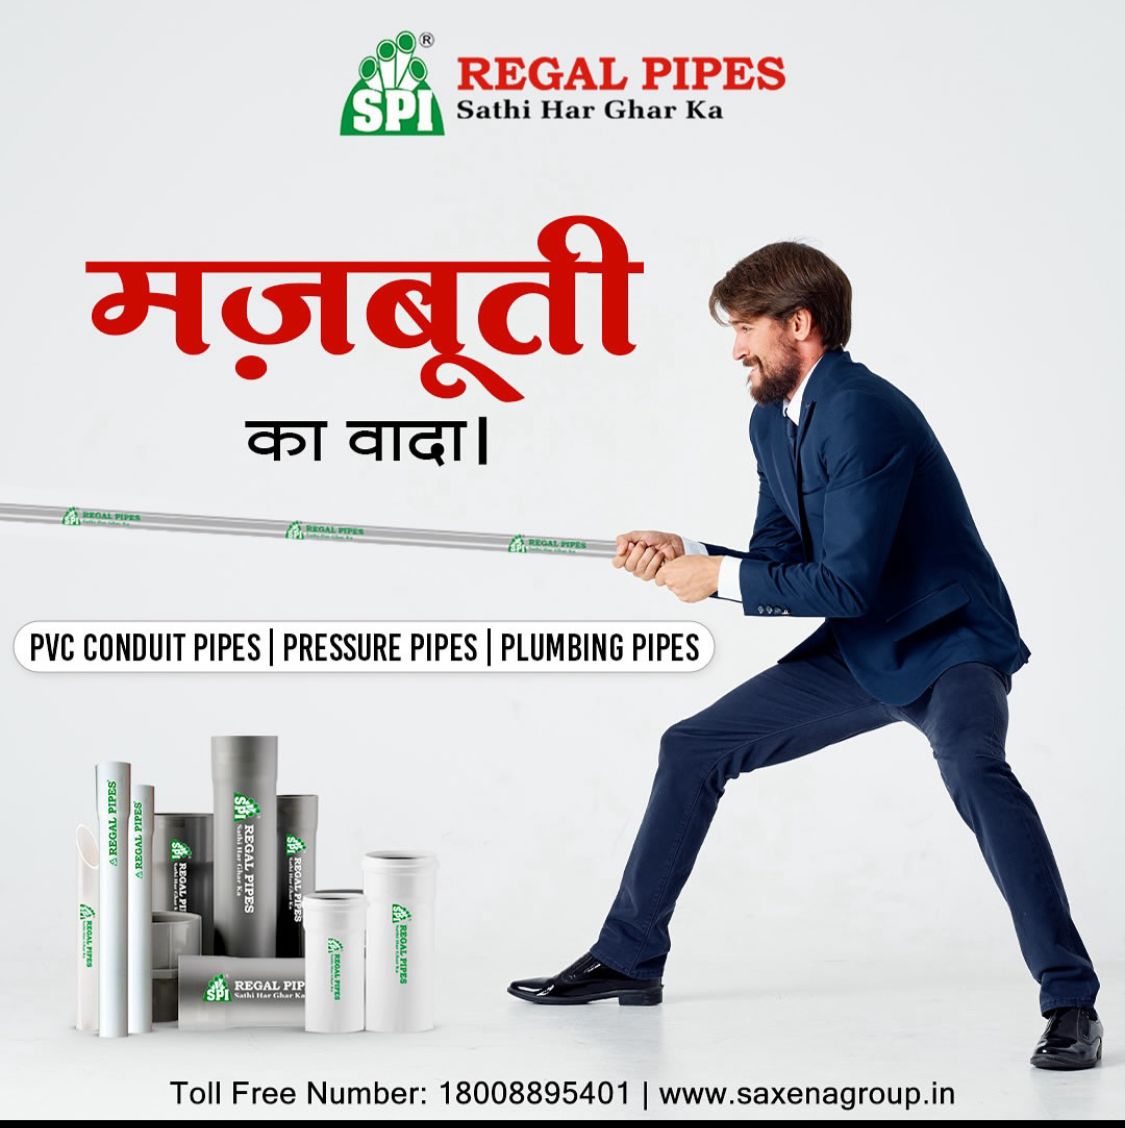 Unbreakable Pipes | Saxena Plastic Industries  | PVC PIPE IN KURALI , BEST PIPES , STRONG PIPES , UNBREAKABLE PIPES , REGAL PIPES , PRESSURE PIPES , CONDUIT PIPES  - GL116540